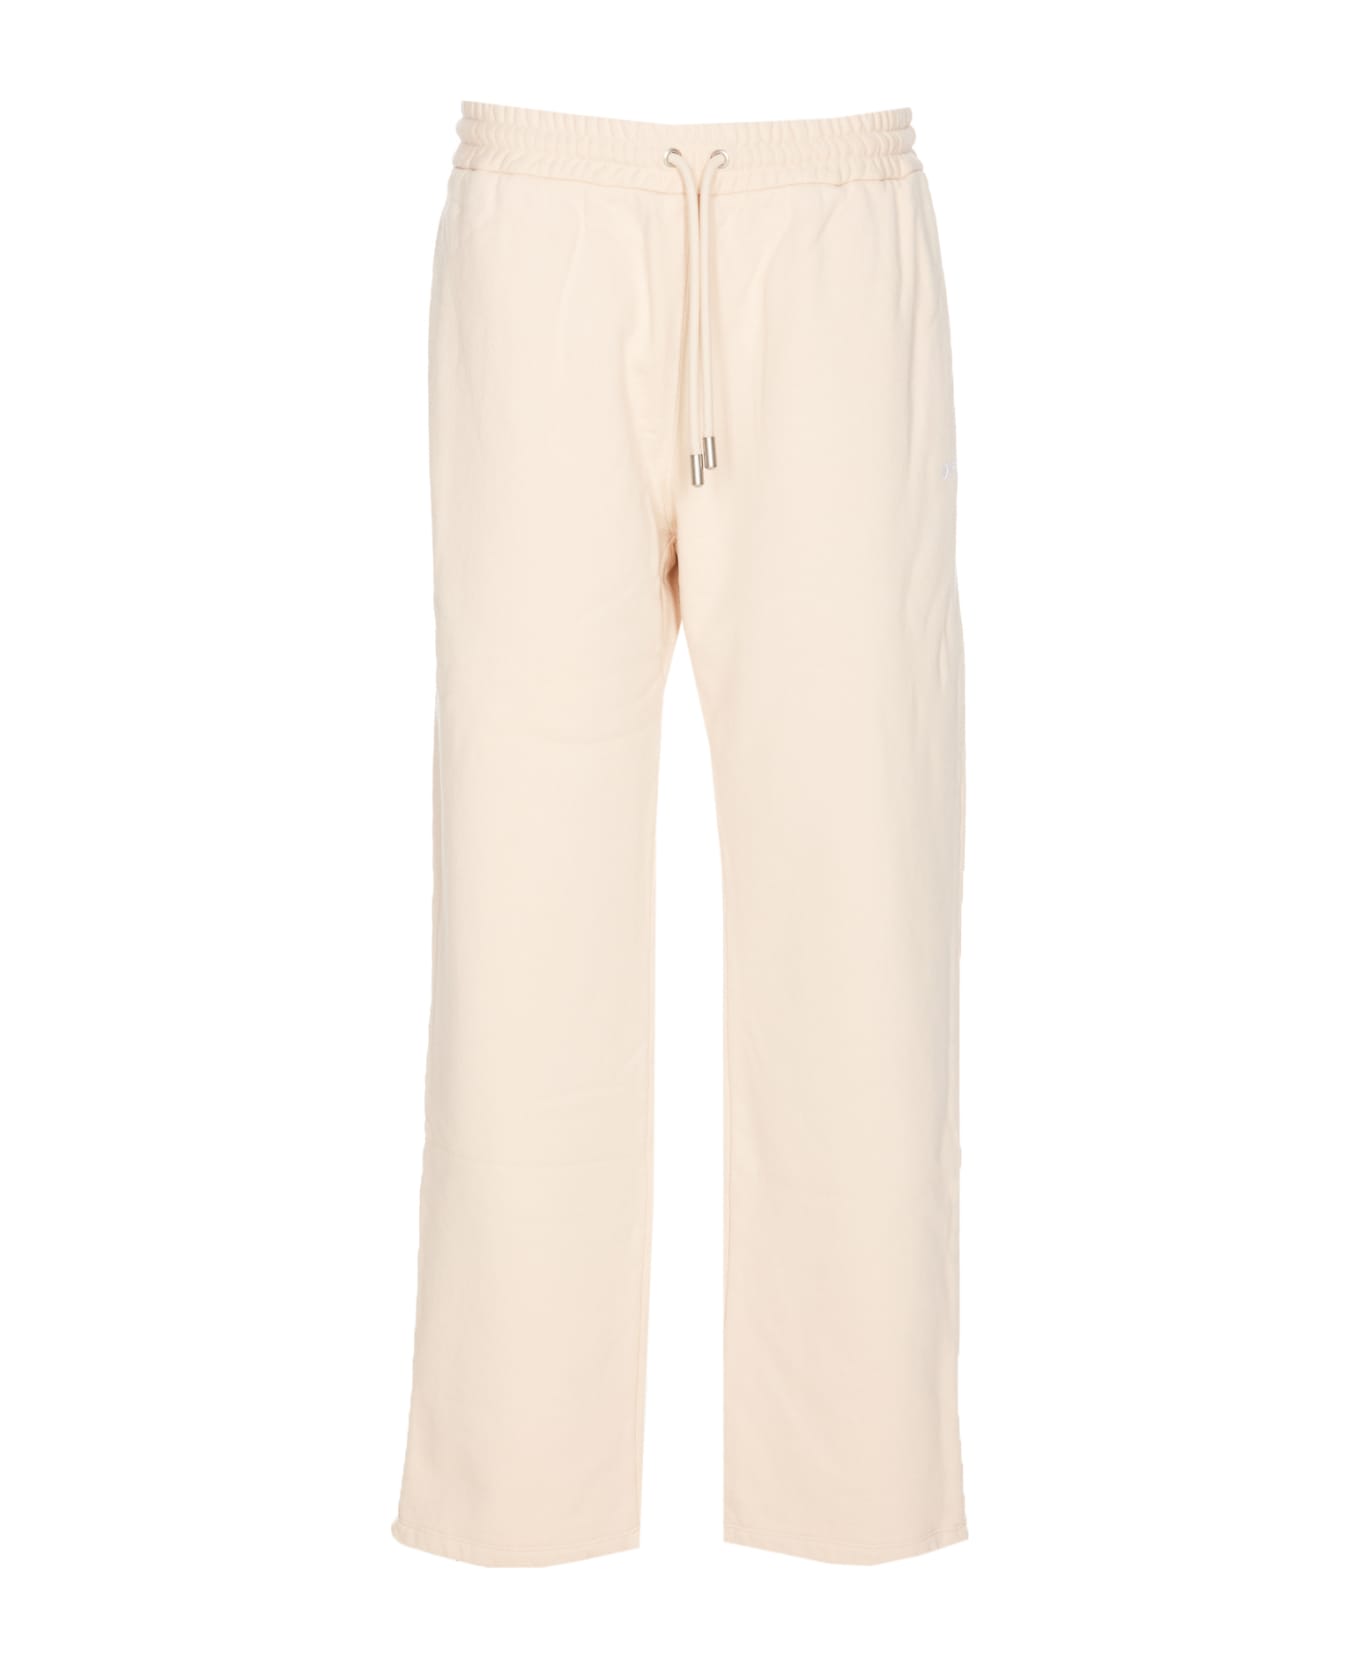 Off-White Cornely Diags Pants - White ボトムス